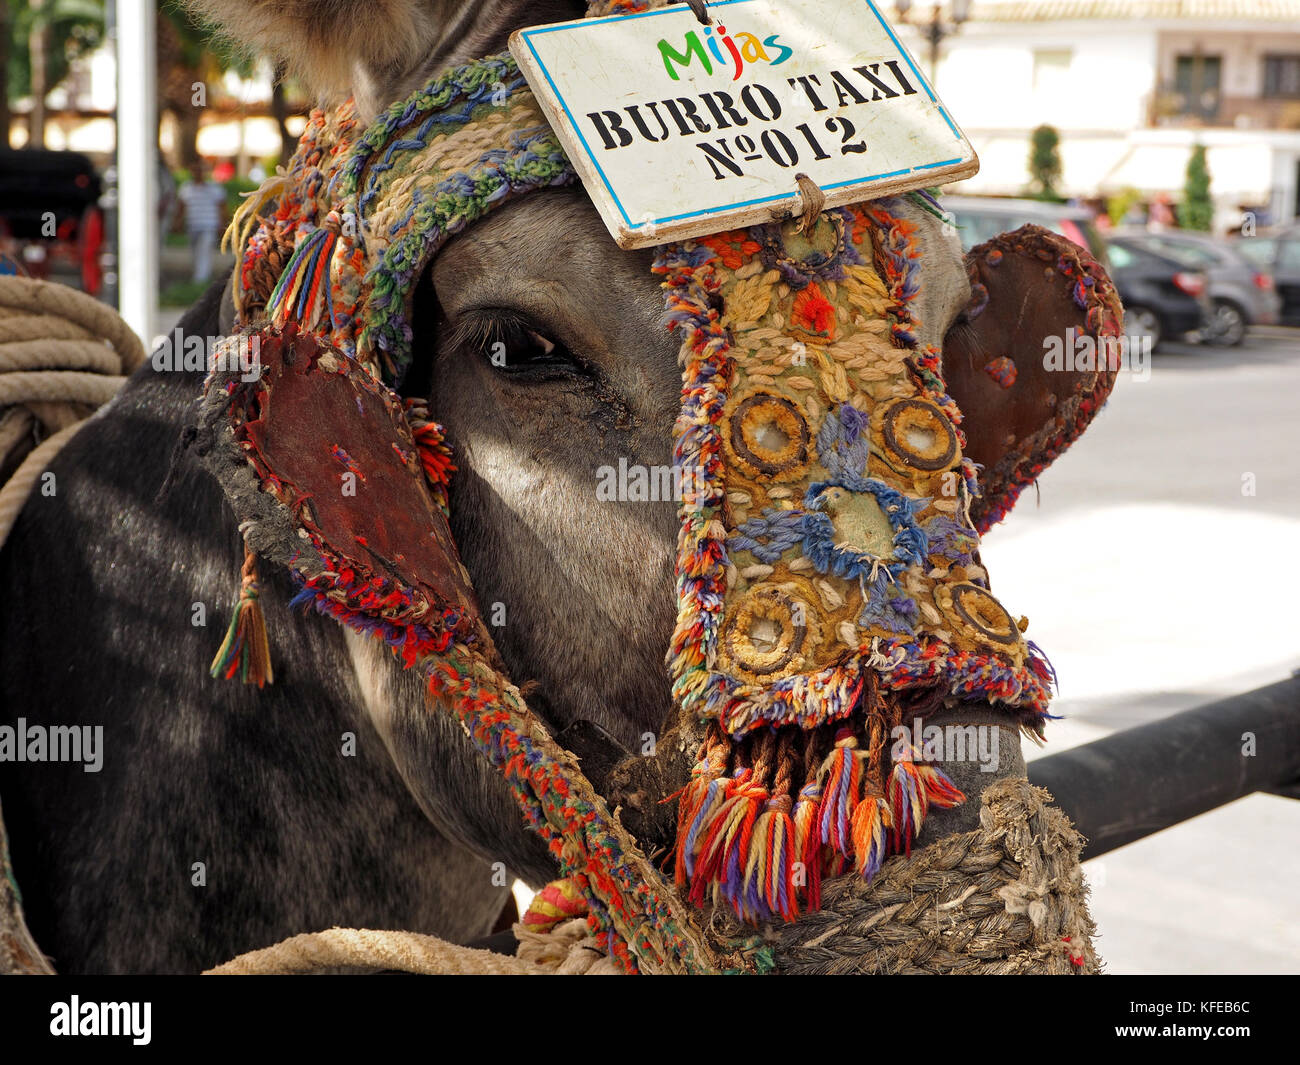 donkey with colourful decorated harness and a sign reading Burro taxi No. 12 at the Donkey-taxi rank in Mijas, Spain Stock Photo